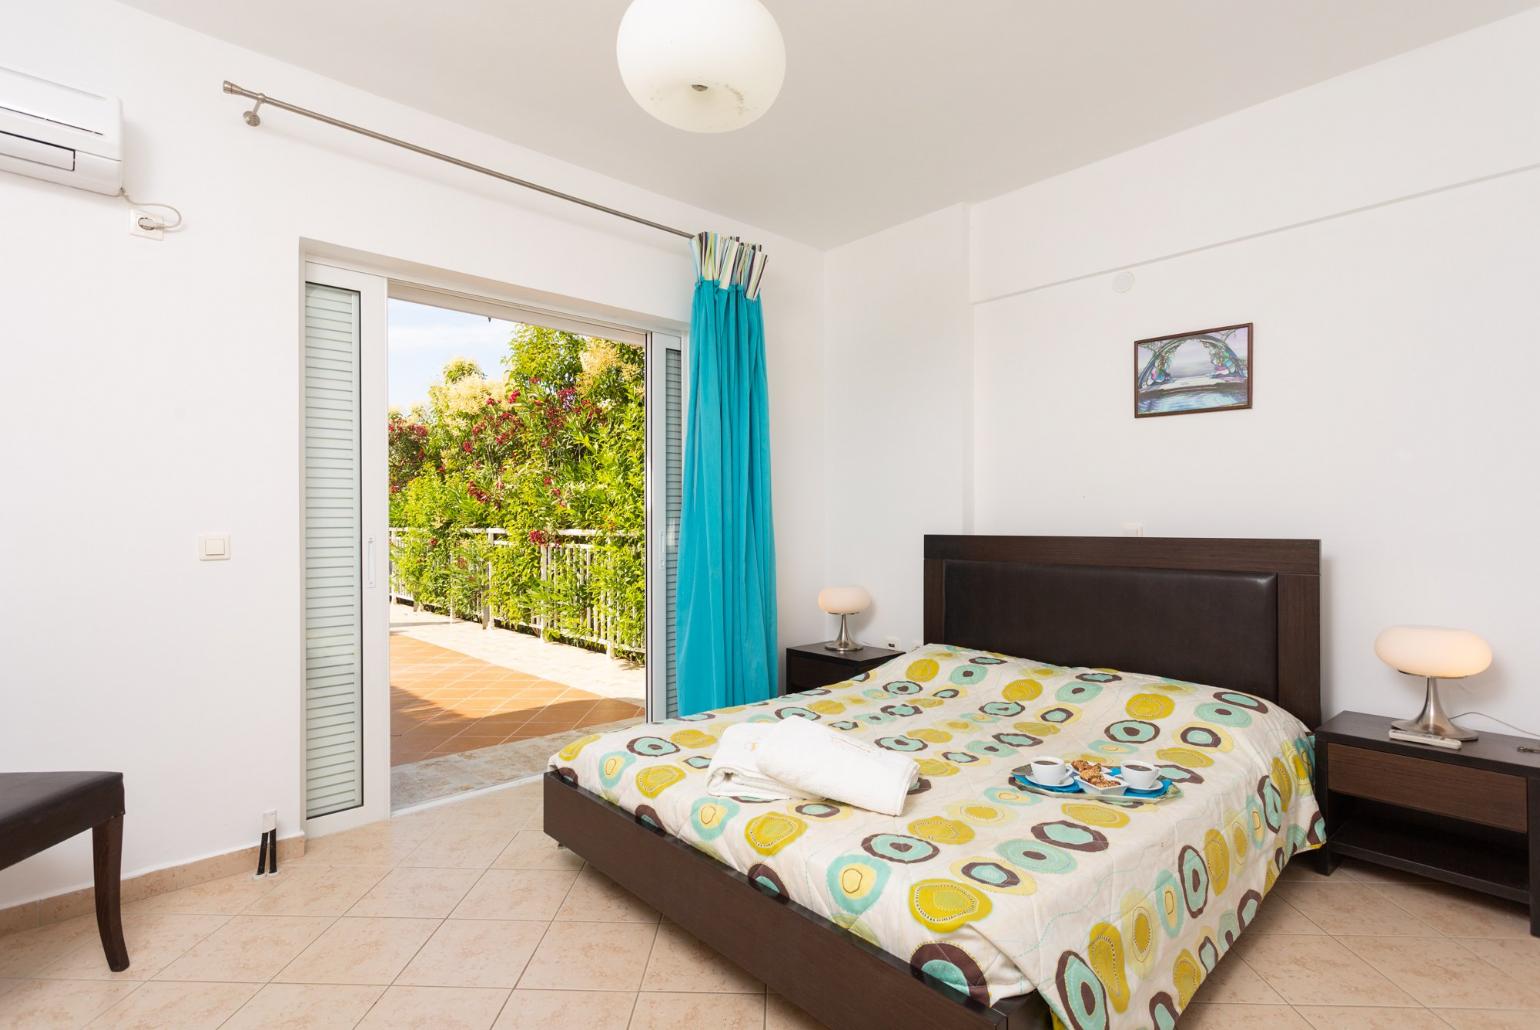 Double bedroom with A/C, en suite bathroom, and terrace access